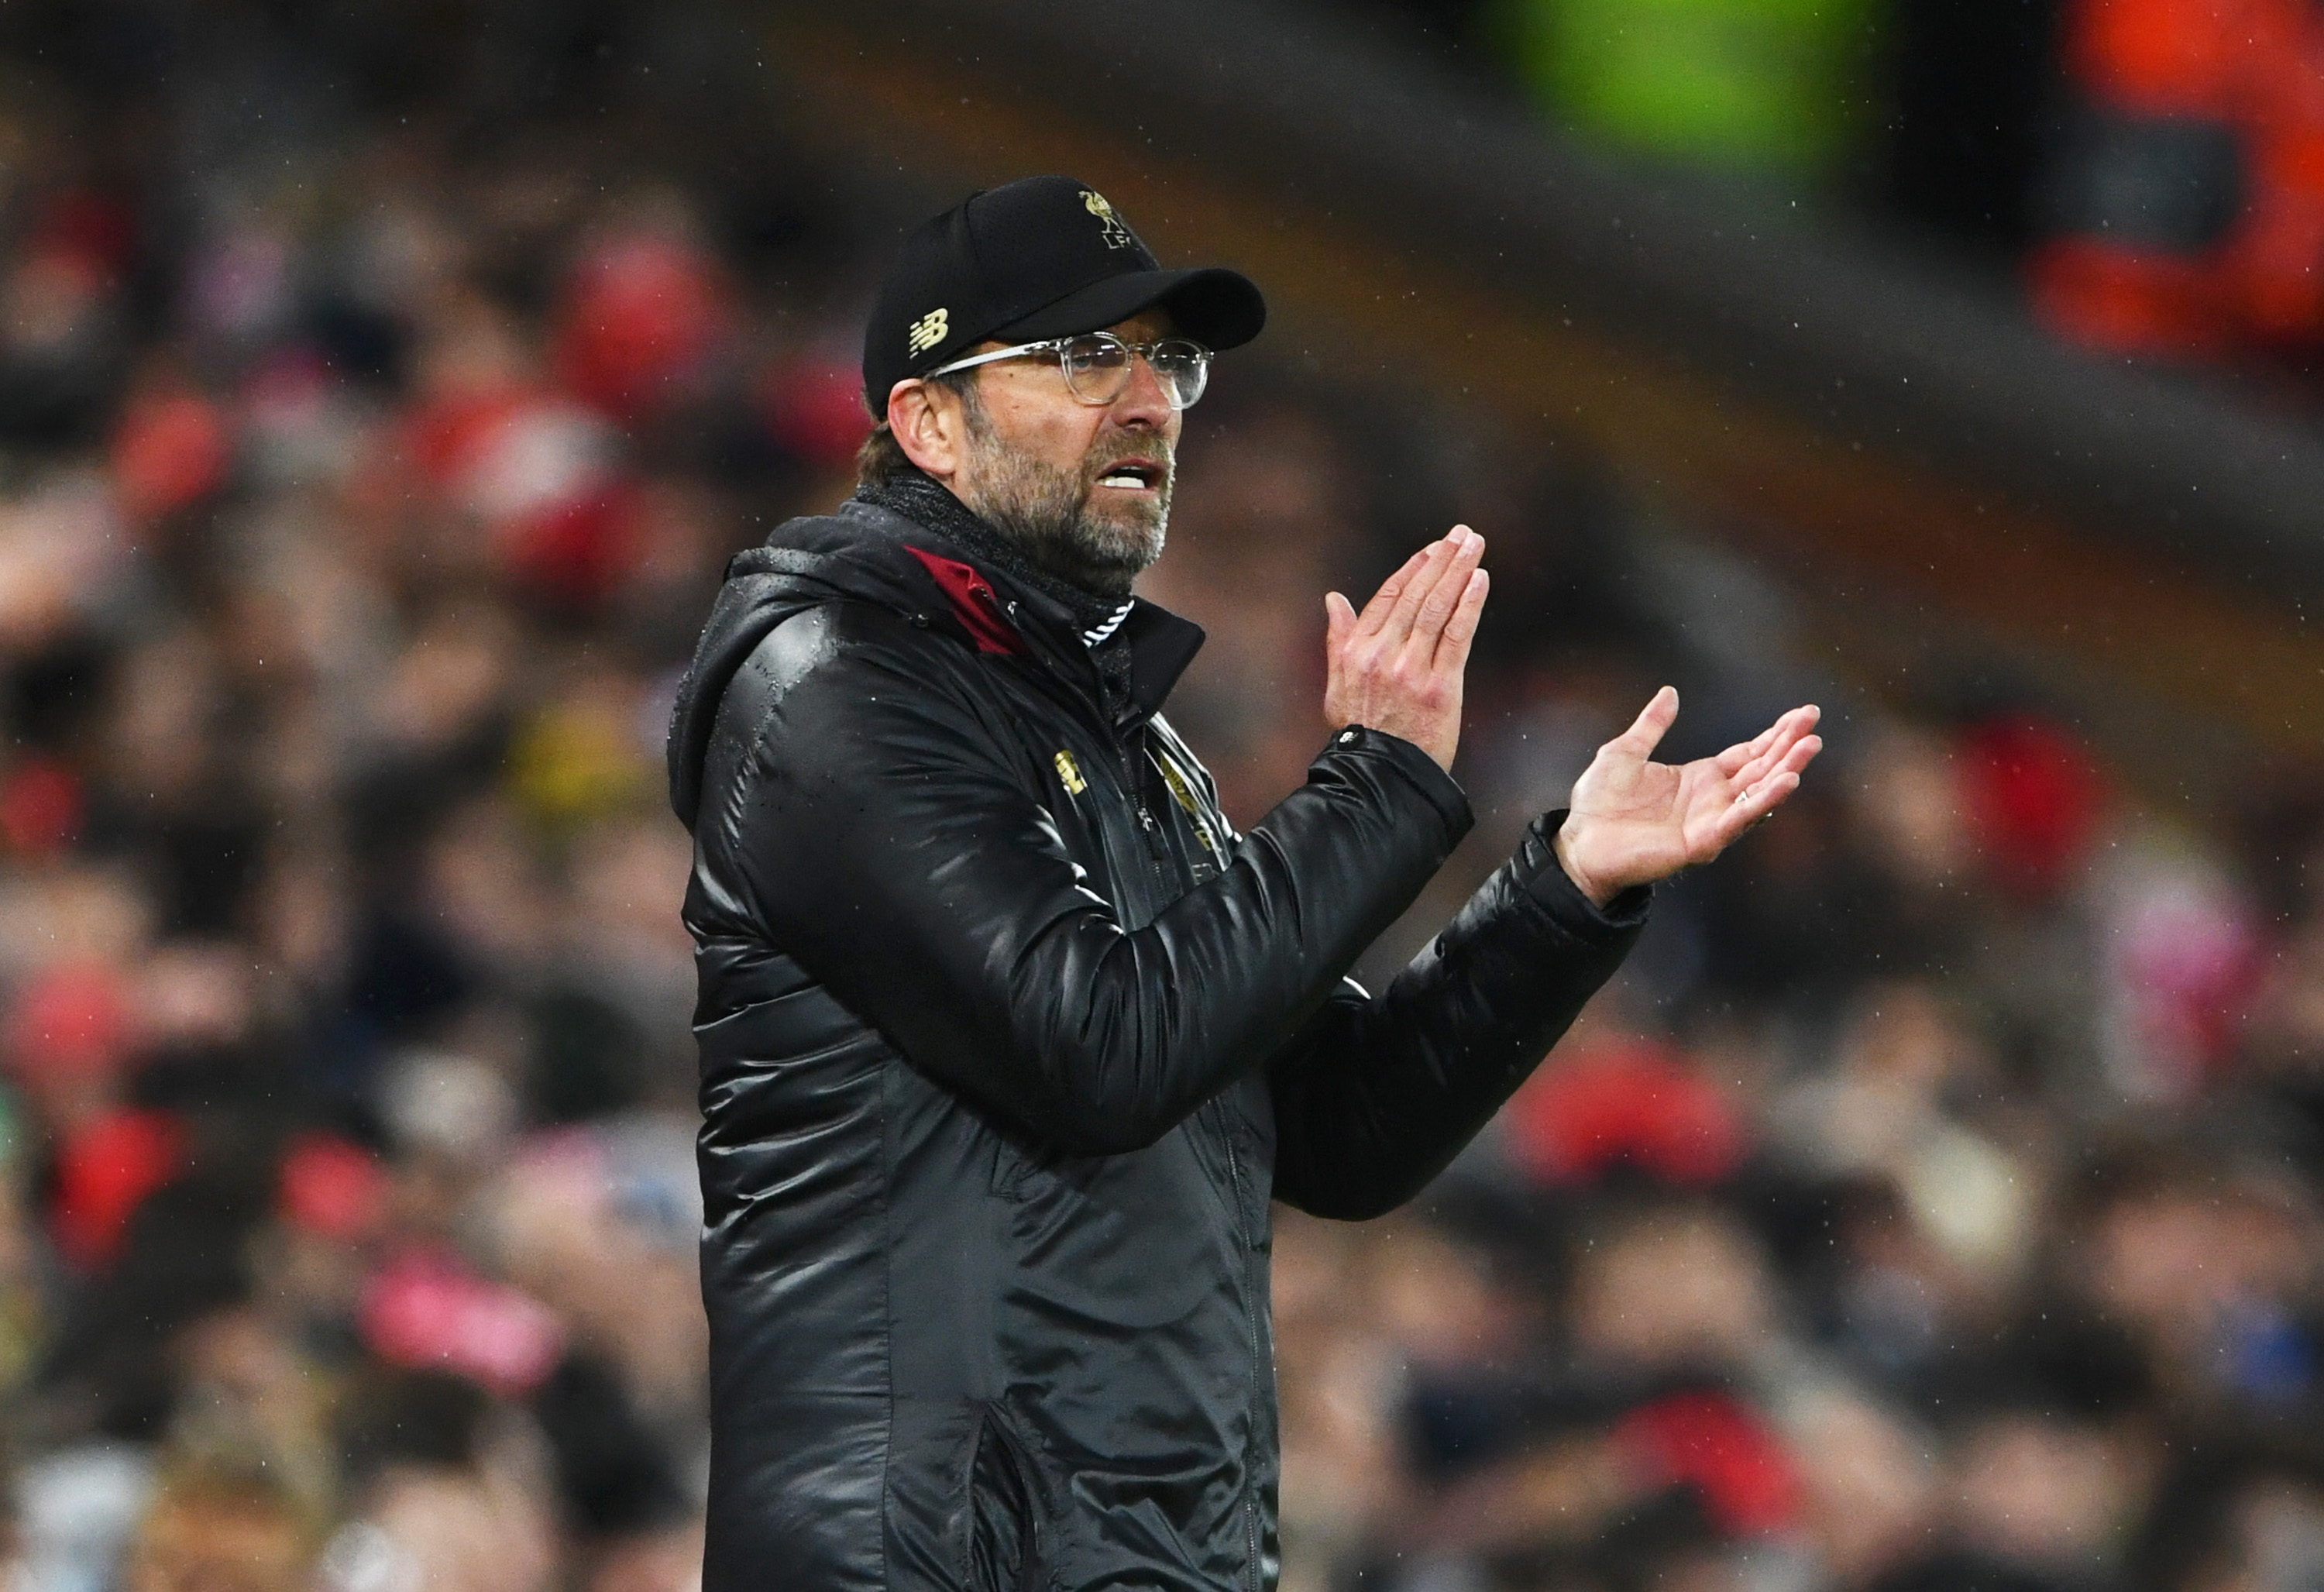 LIVERPOOL, ENGLAND - FEBRUARY 19:  Jurgen Klopp, Manager of Liverpool applauds during the UEFA Champions League Round of 16 First Leg match between Liverpool and FC Bayern Muenchen at Anfield on February 19, 2019 in Liverpool, England. (Photo by Stu Forster/Getty Images)